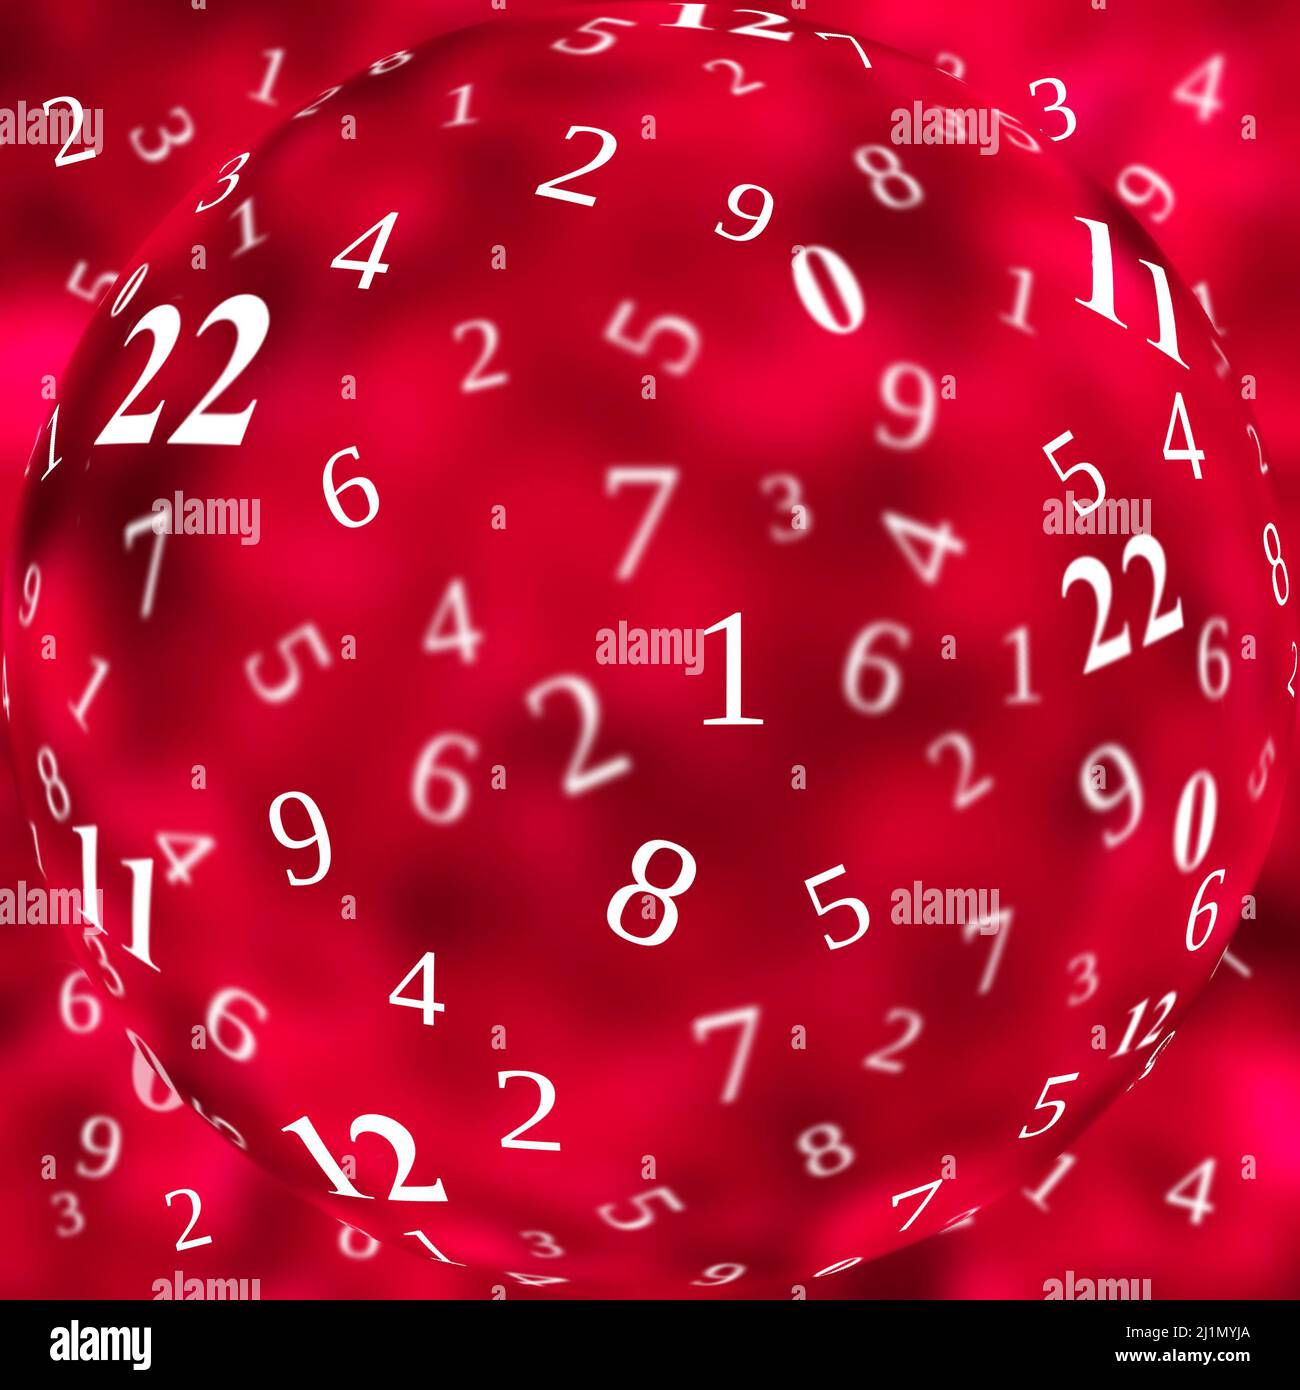 numbers in a sphere, math and numerology concept Stock Photo